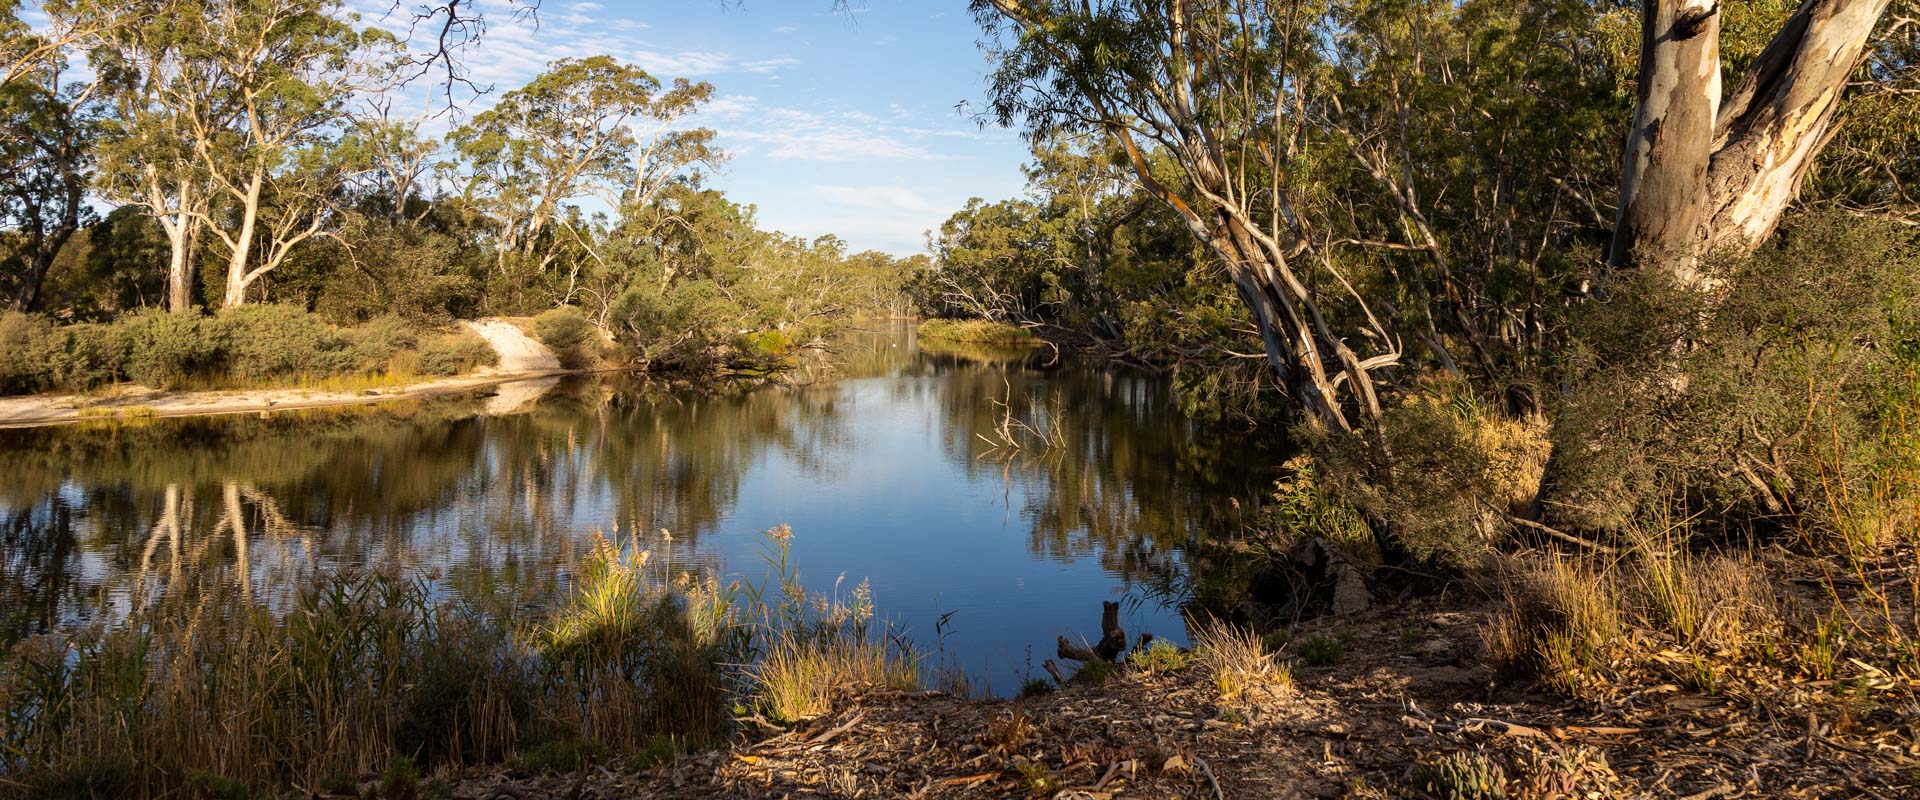 A winding river in a rugged bushland landscape. 